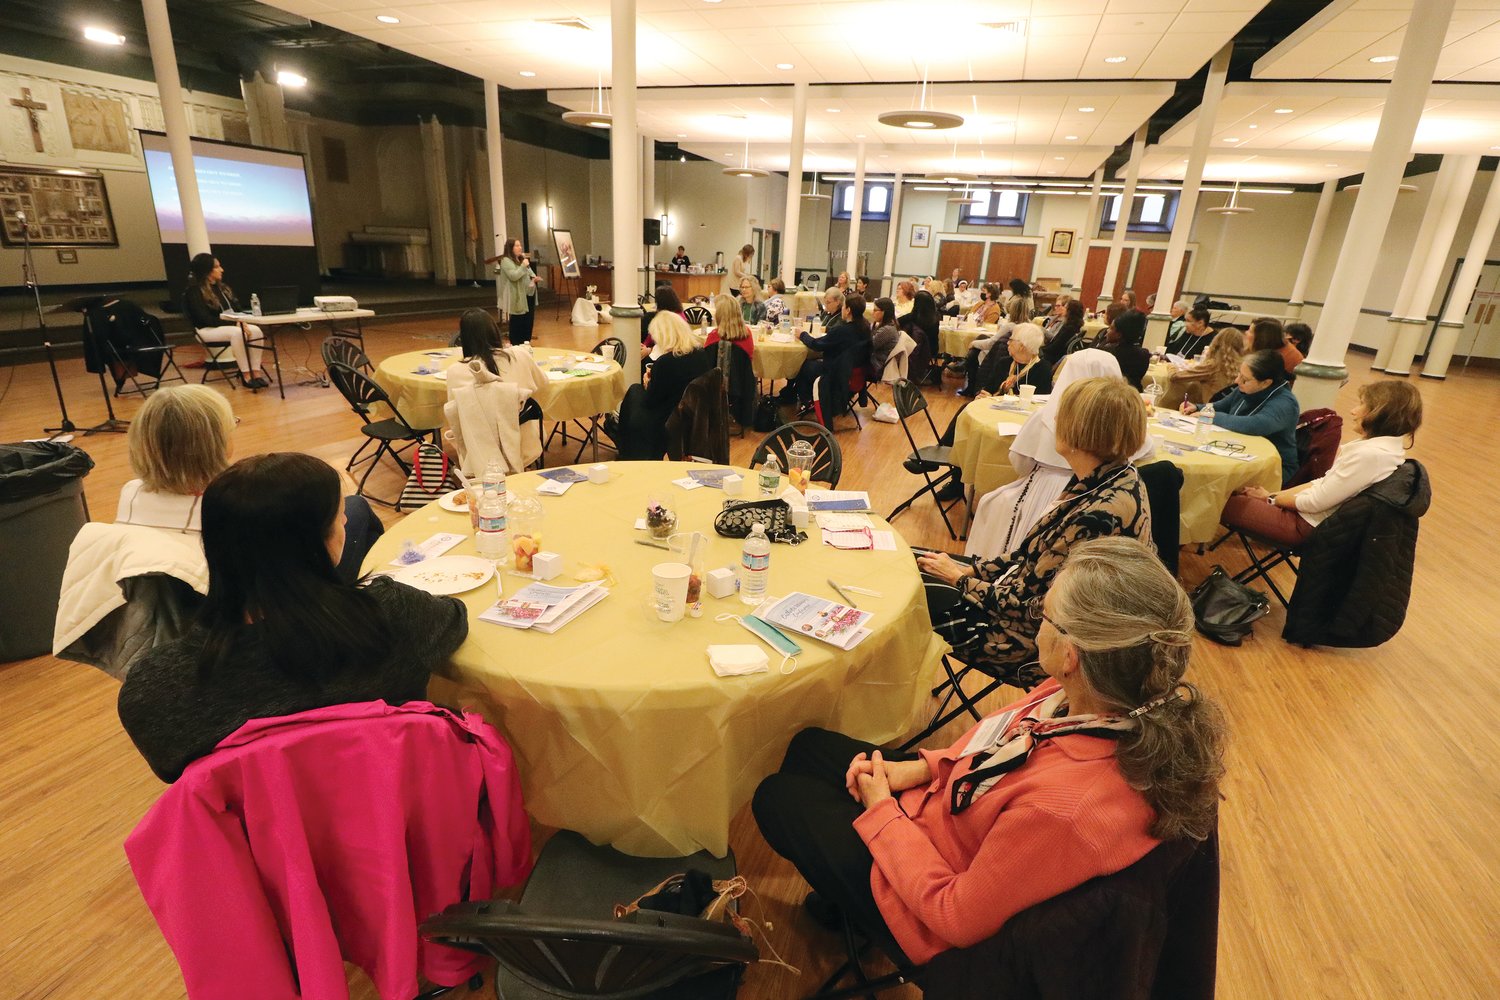 The diocesan Office of Faith Formation held a special event for all women who desired to grow in a relationship with Jesus Christ through scripture, prayer, liturgy and fellowship with other women